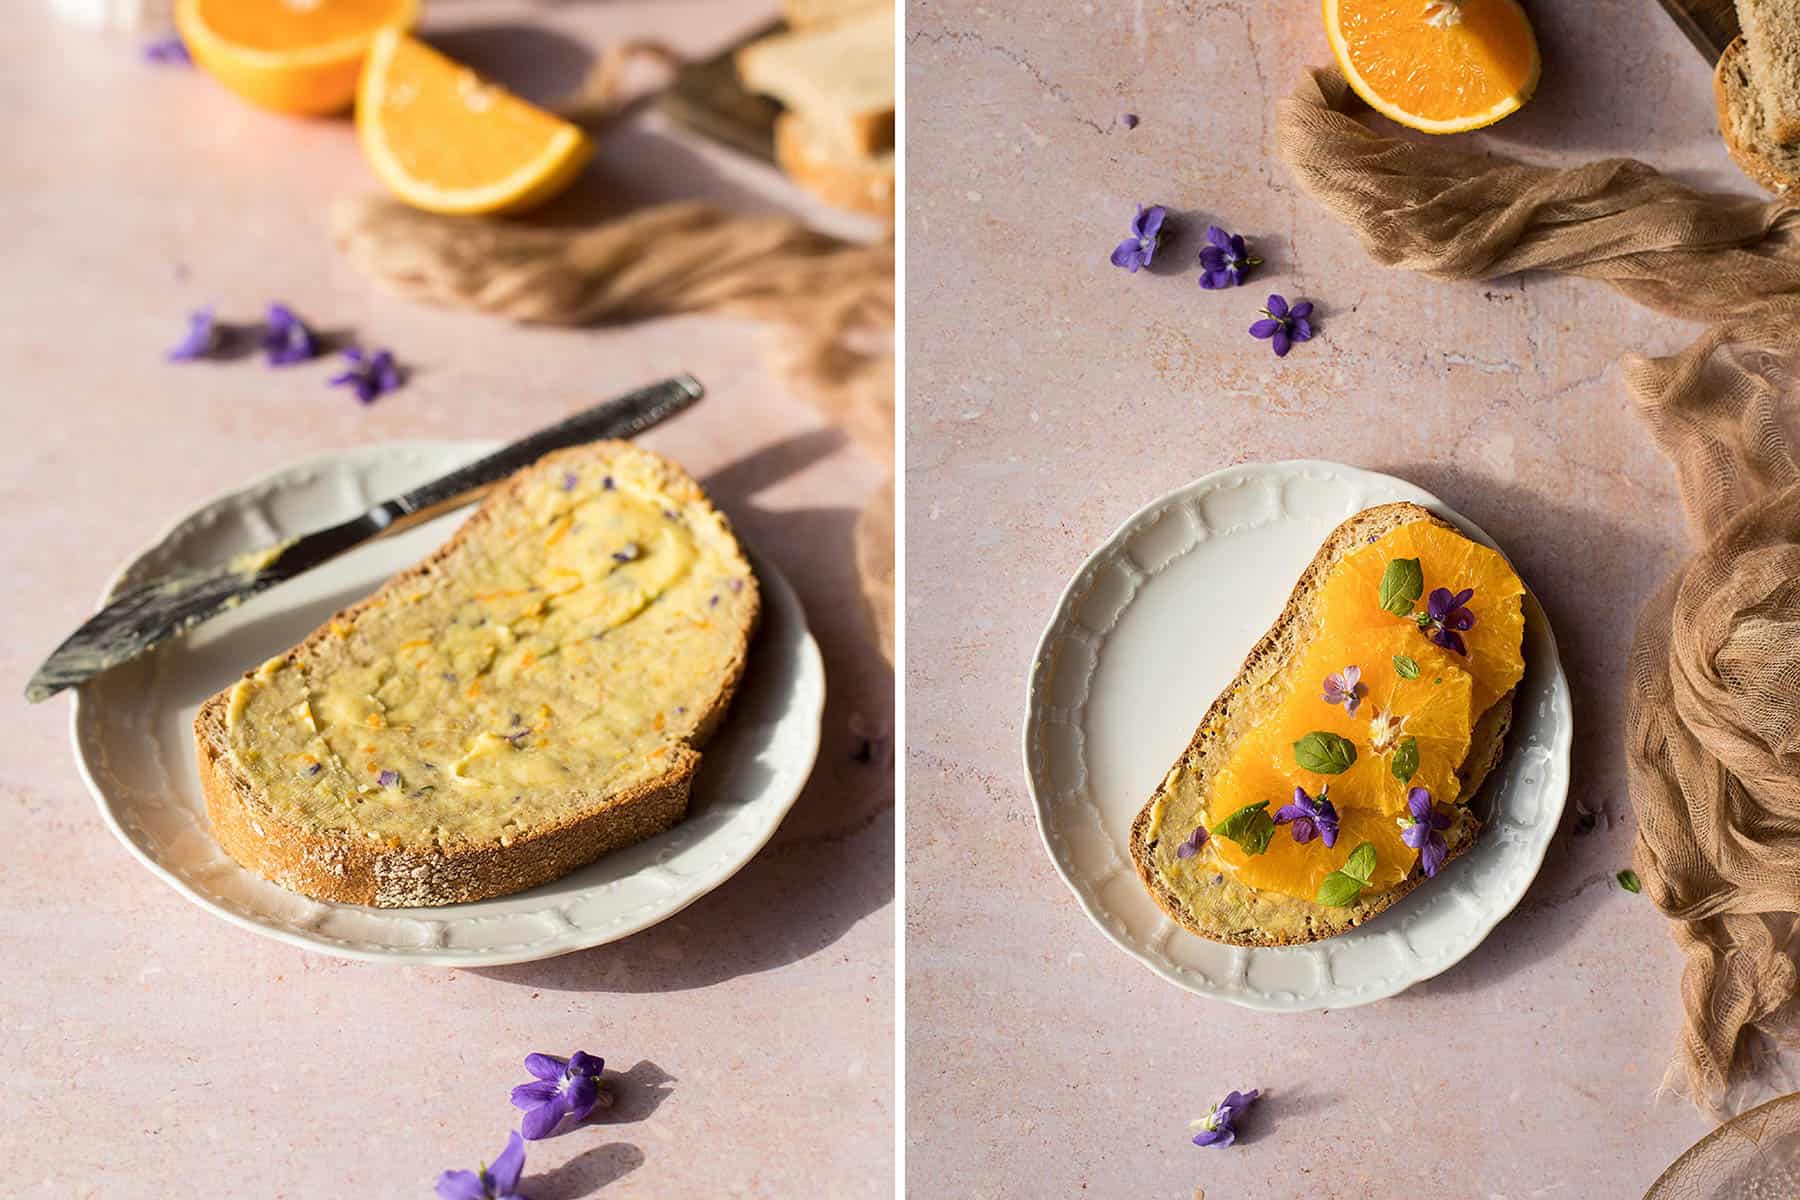 Diptych of a toast with flower honey butter and orange slices.